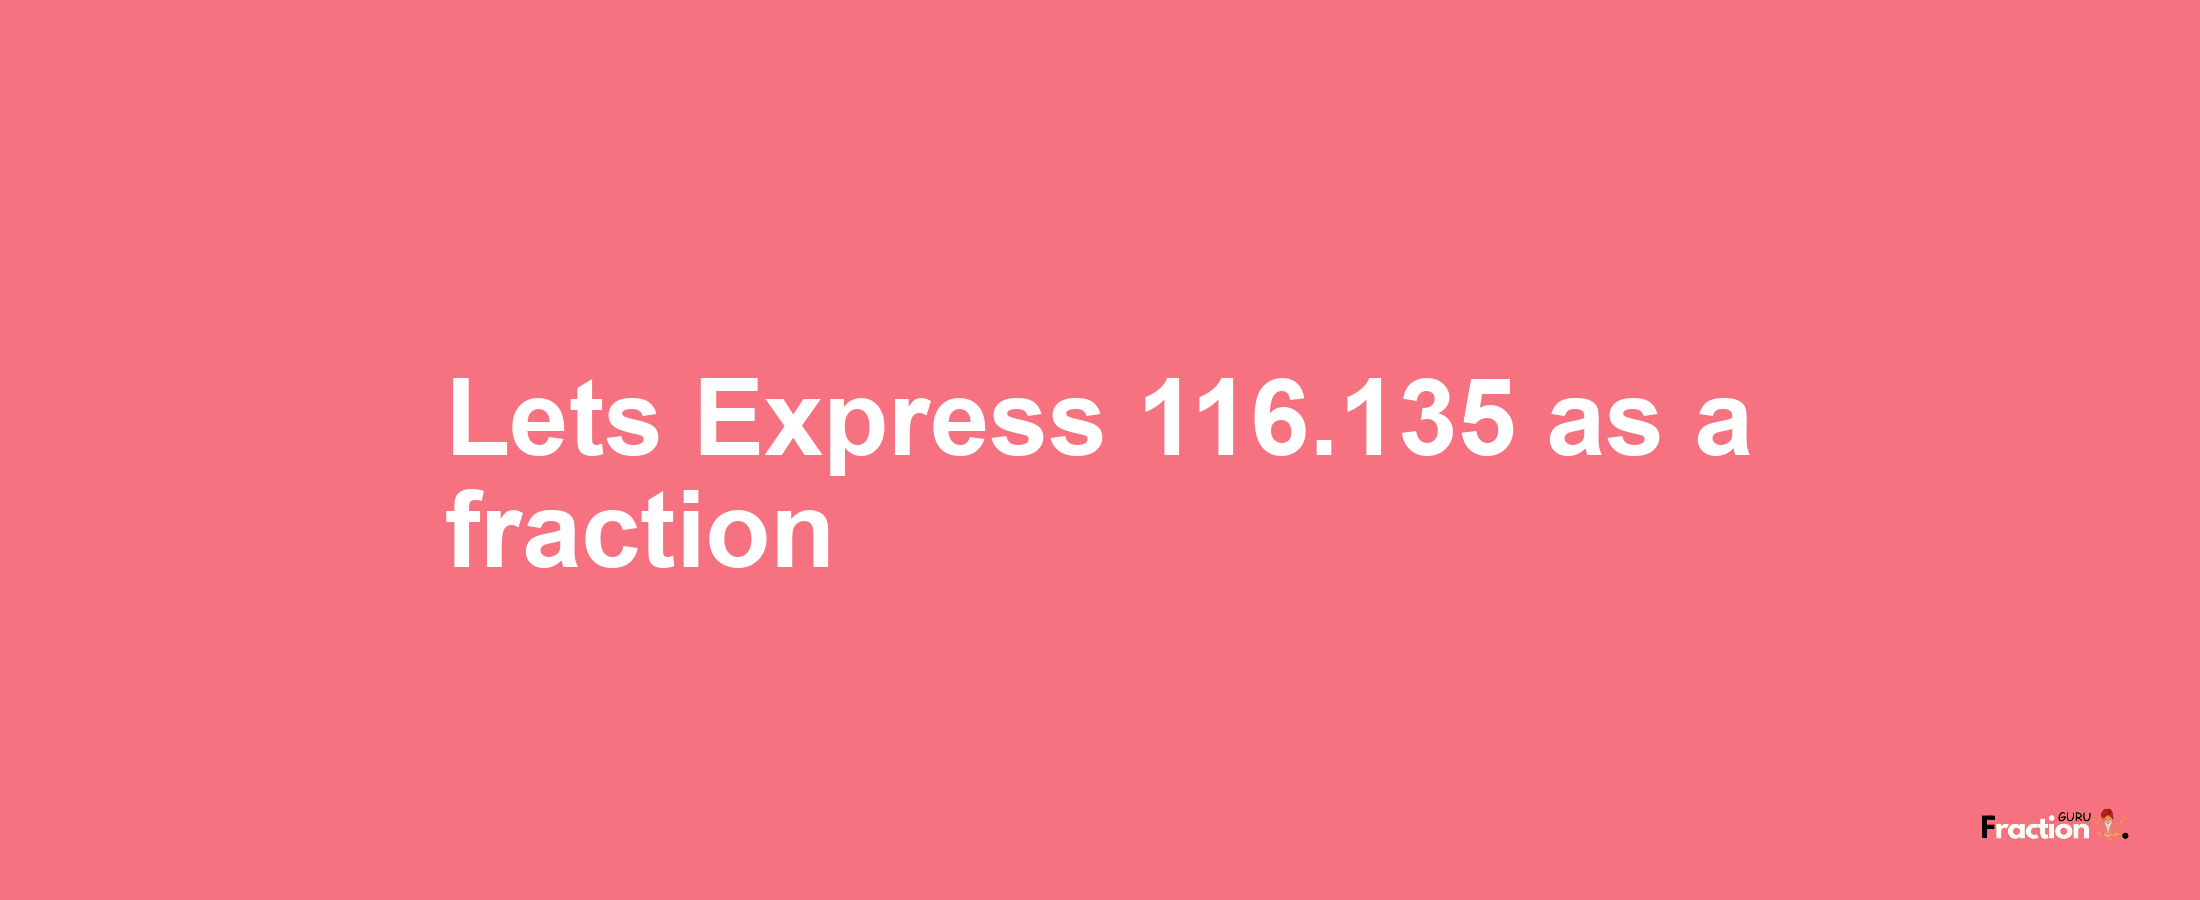 Lets Express 116.135 as afraction